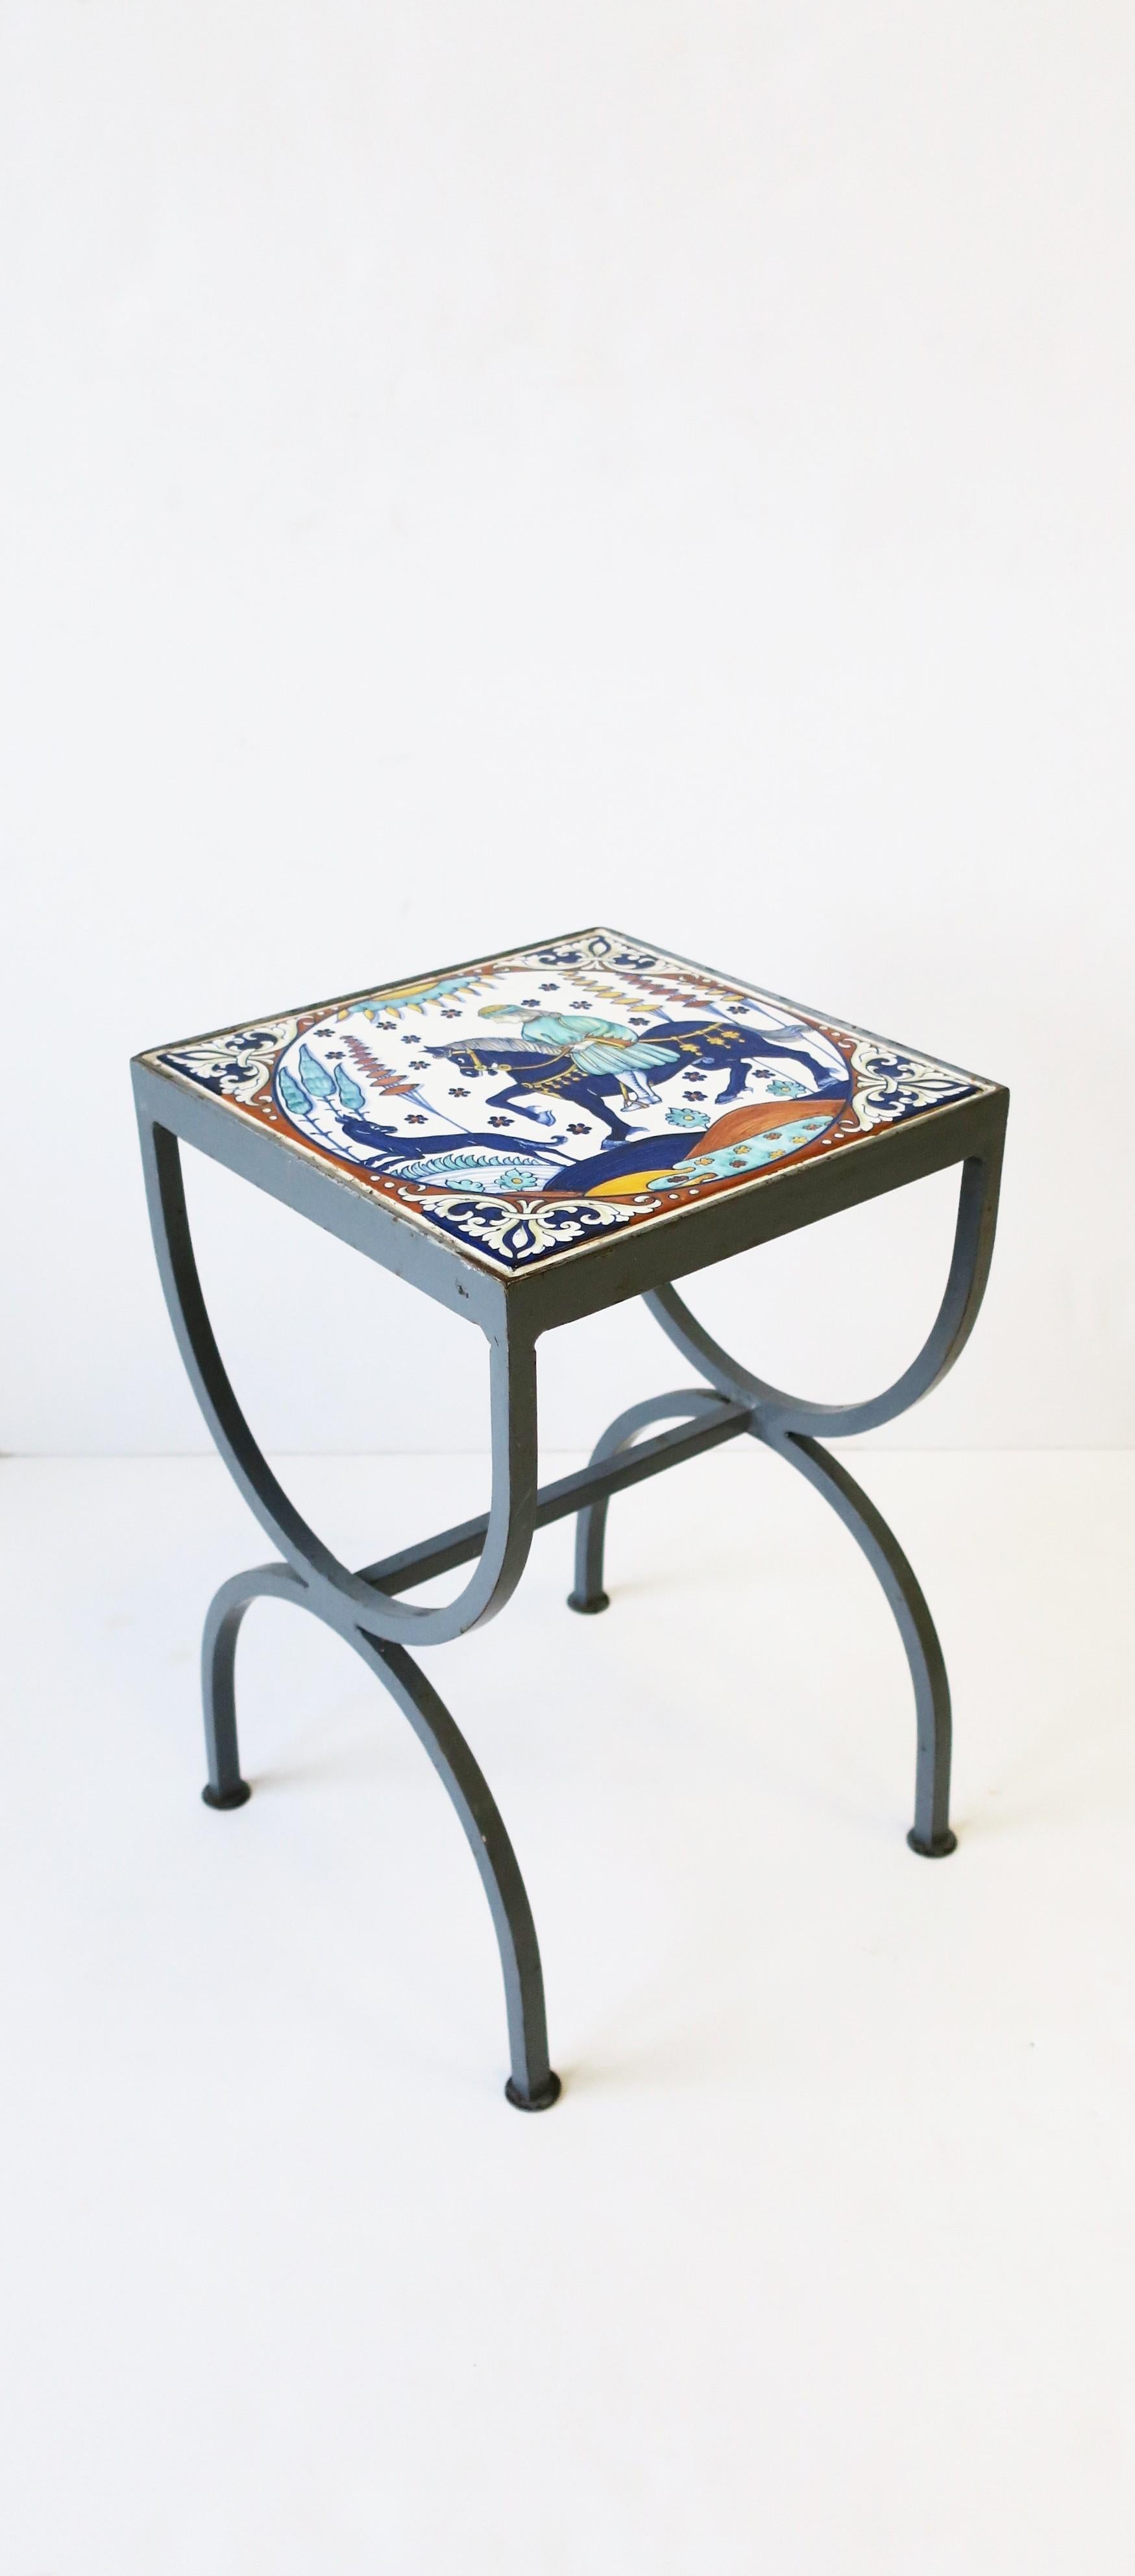 Tile Top Grey Metal Side or Drinks Table Indoors or Patio in the style of Hermes 1